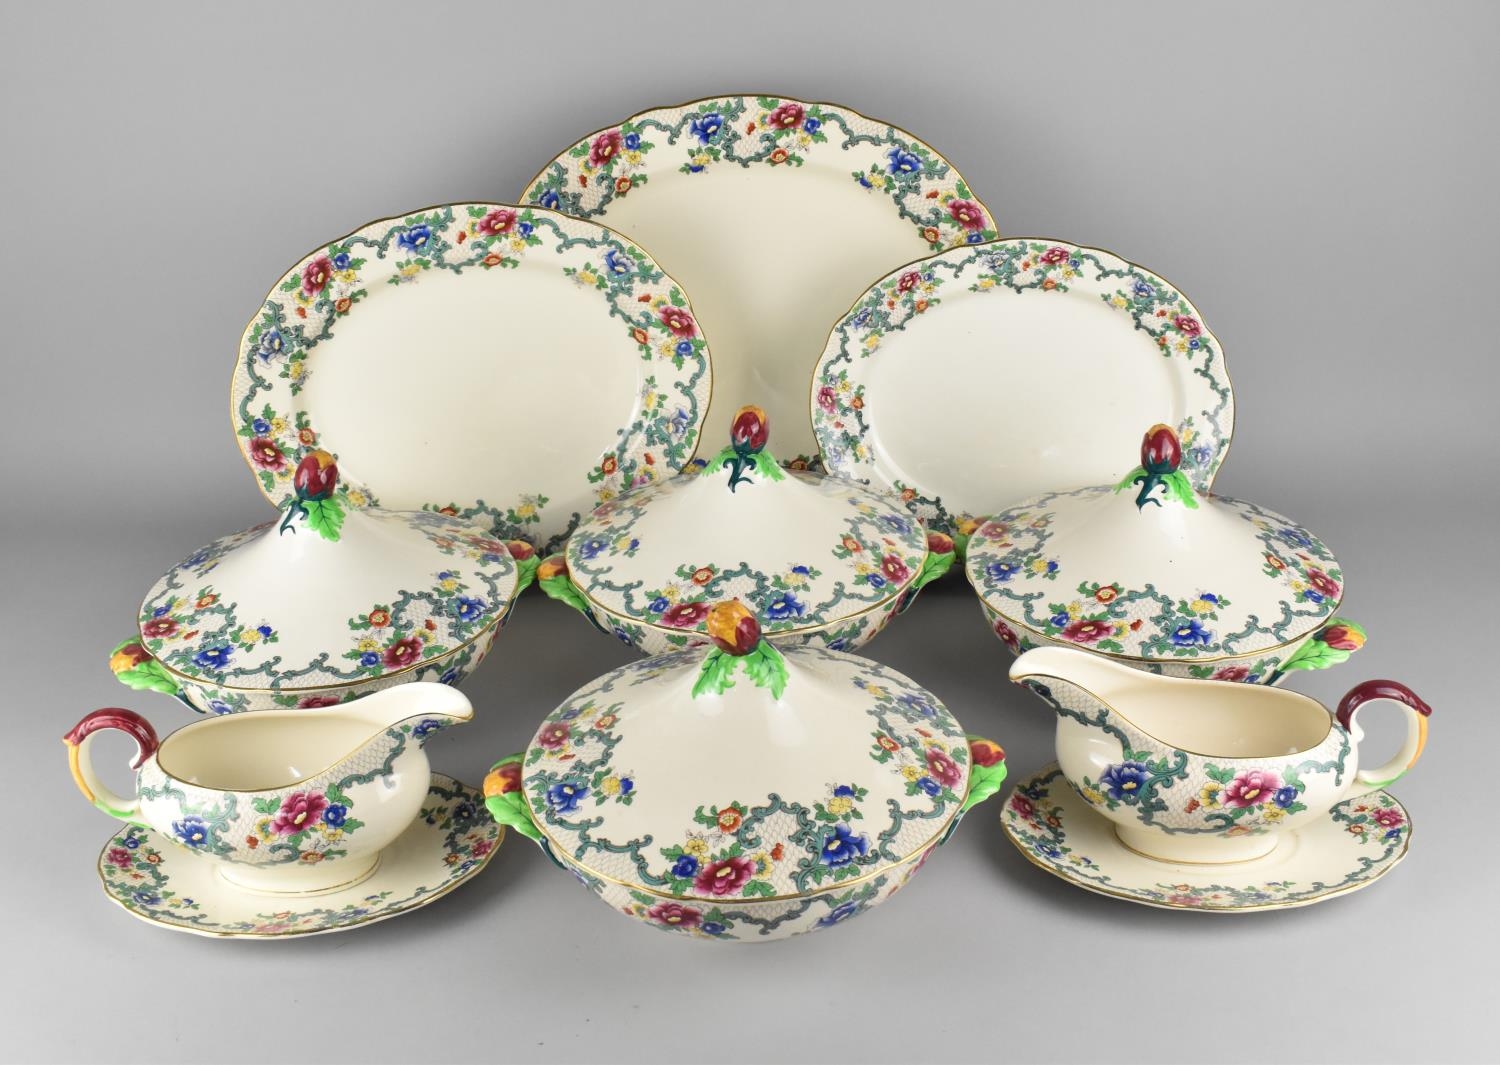 A Collection of Royal Cauldon "Victoria" Pattern Dinnerwares to Comprise Four Tureens, Three